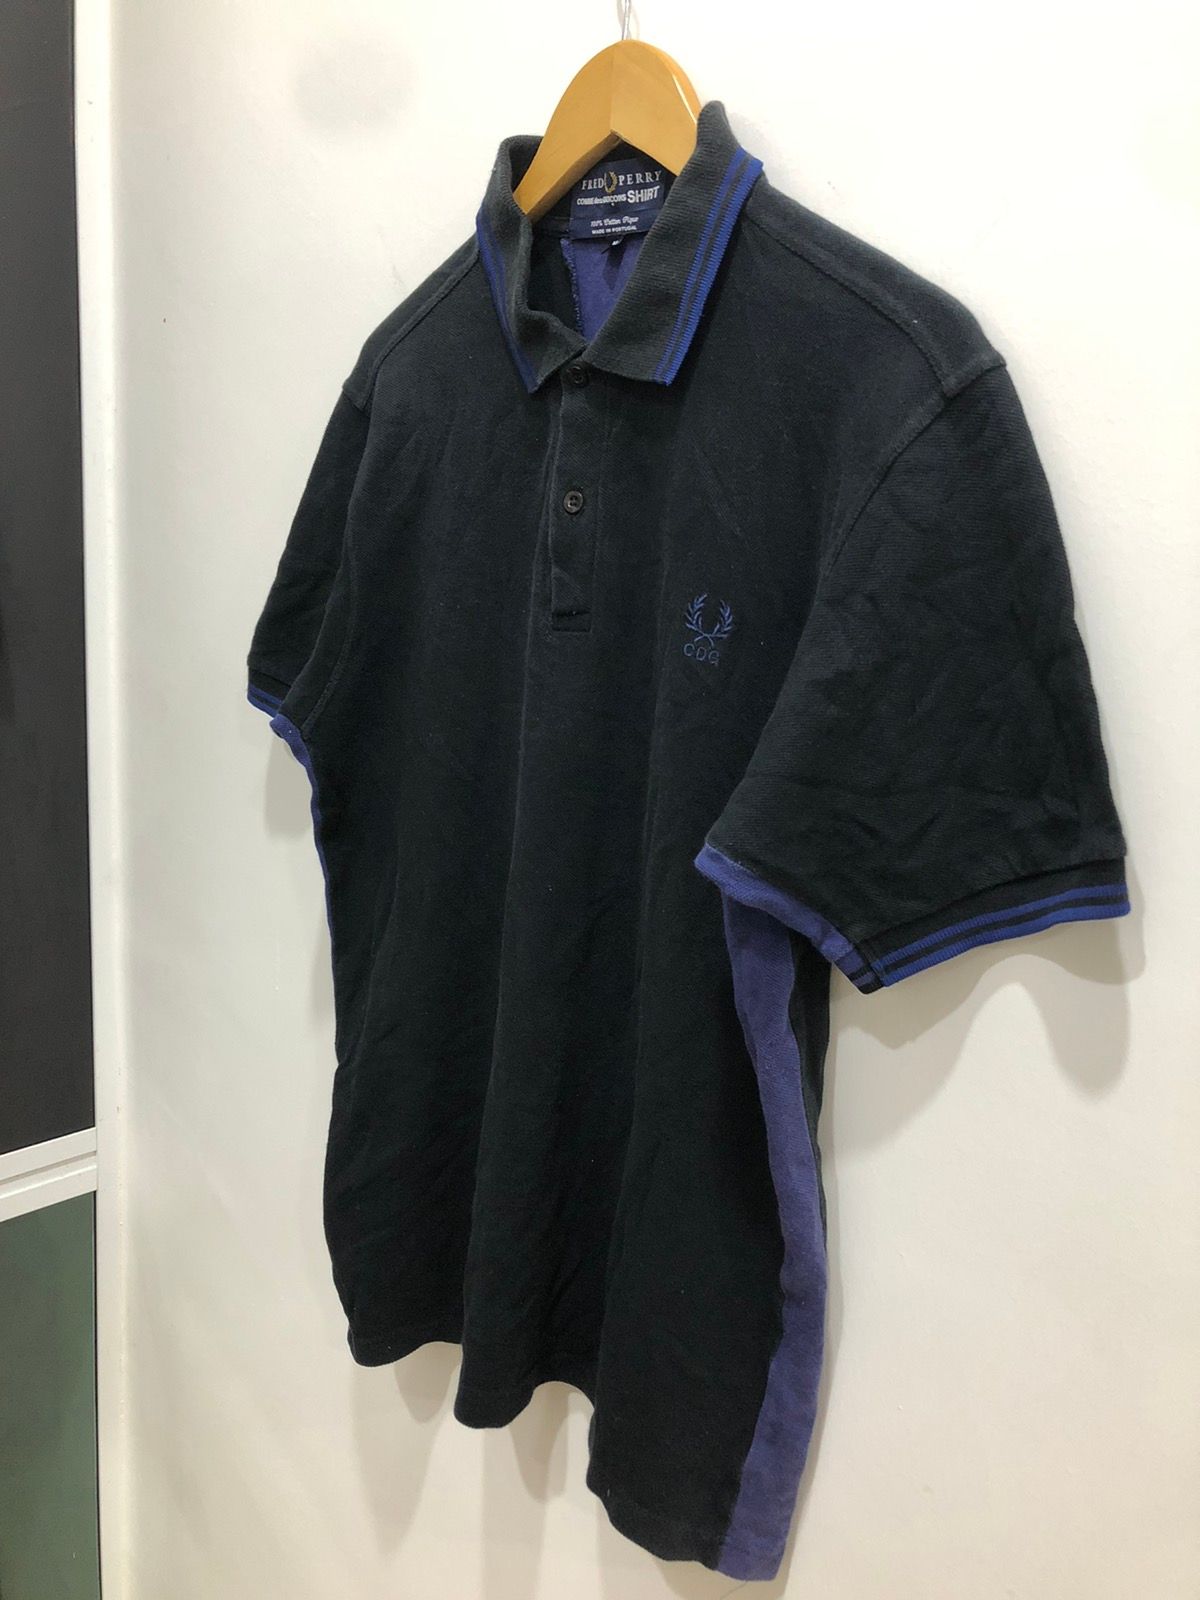 SS04 CDG x Fred Perry Polo Shirt - 2